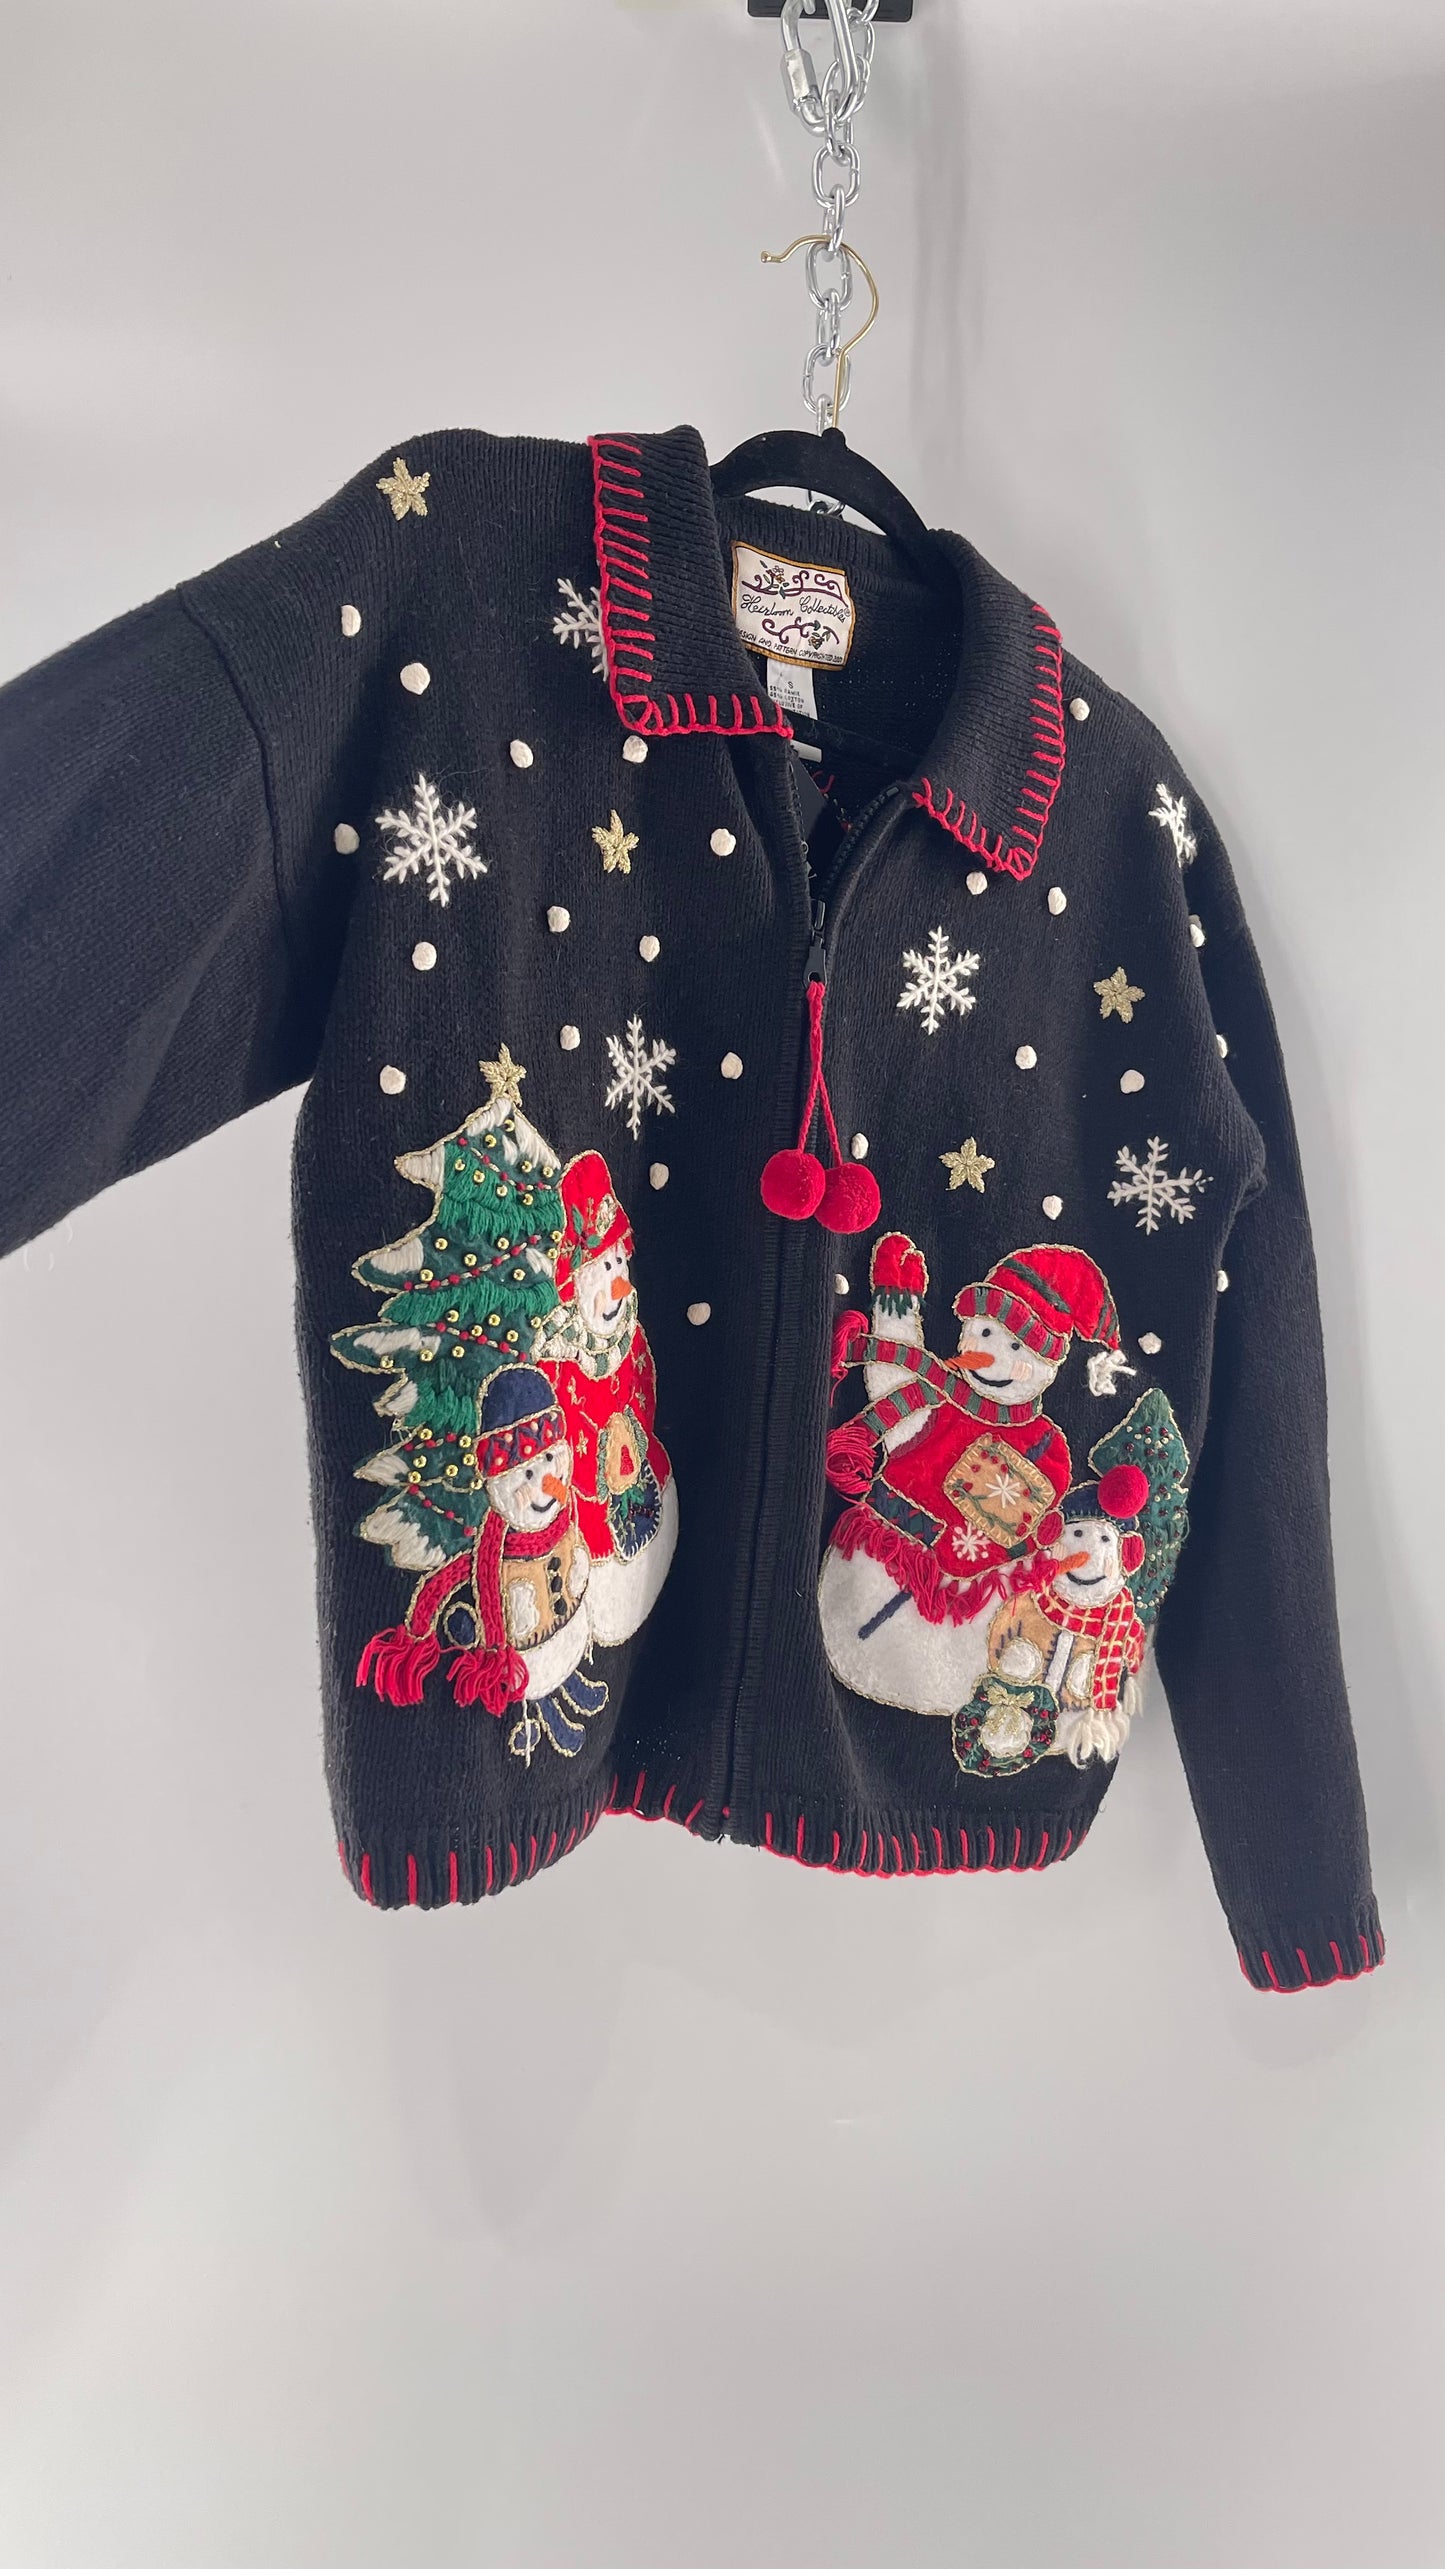 Vintage Reworked Urban Outfitters Heirloom Christmas Cardigan with Festive Snowmen Embroidery, Snowflakes, Christmas Tree and PomPom Zipper Detail  (S)